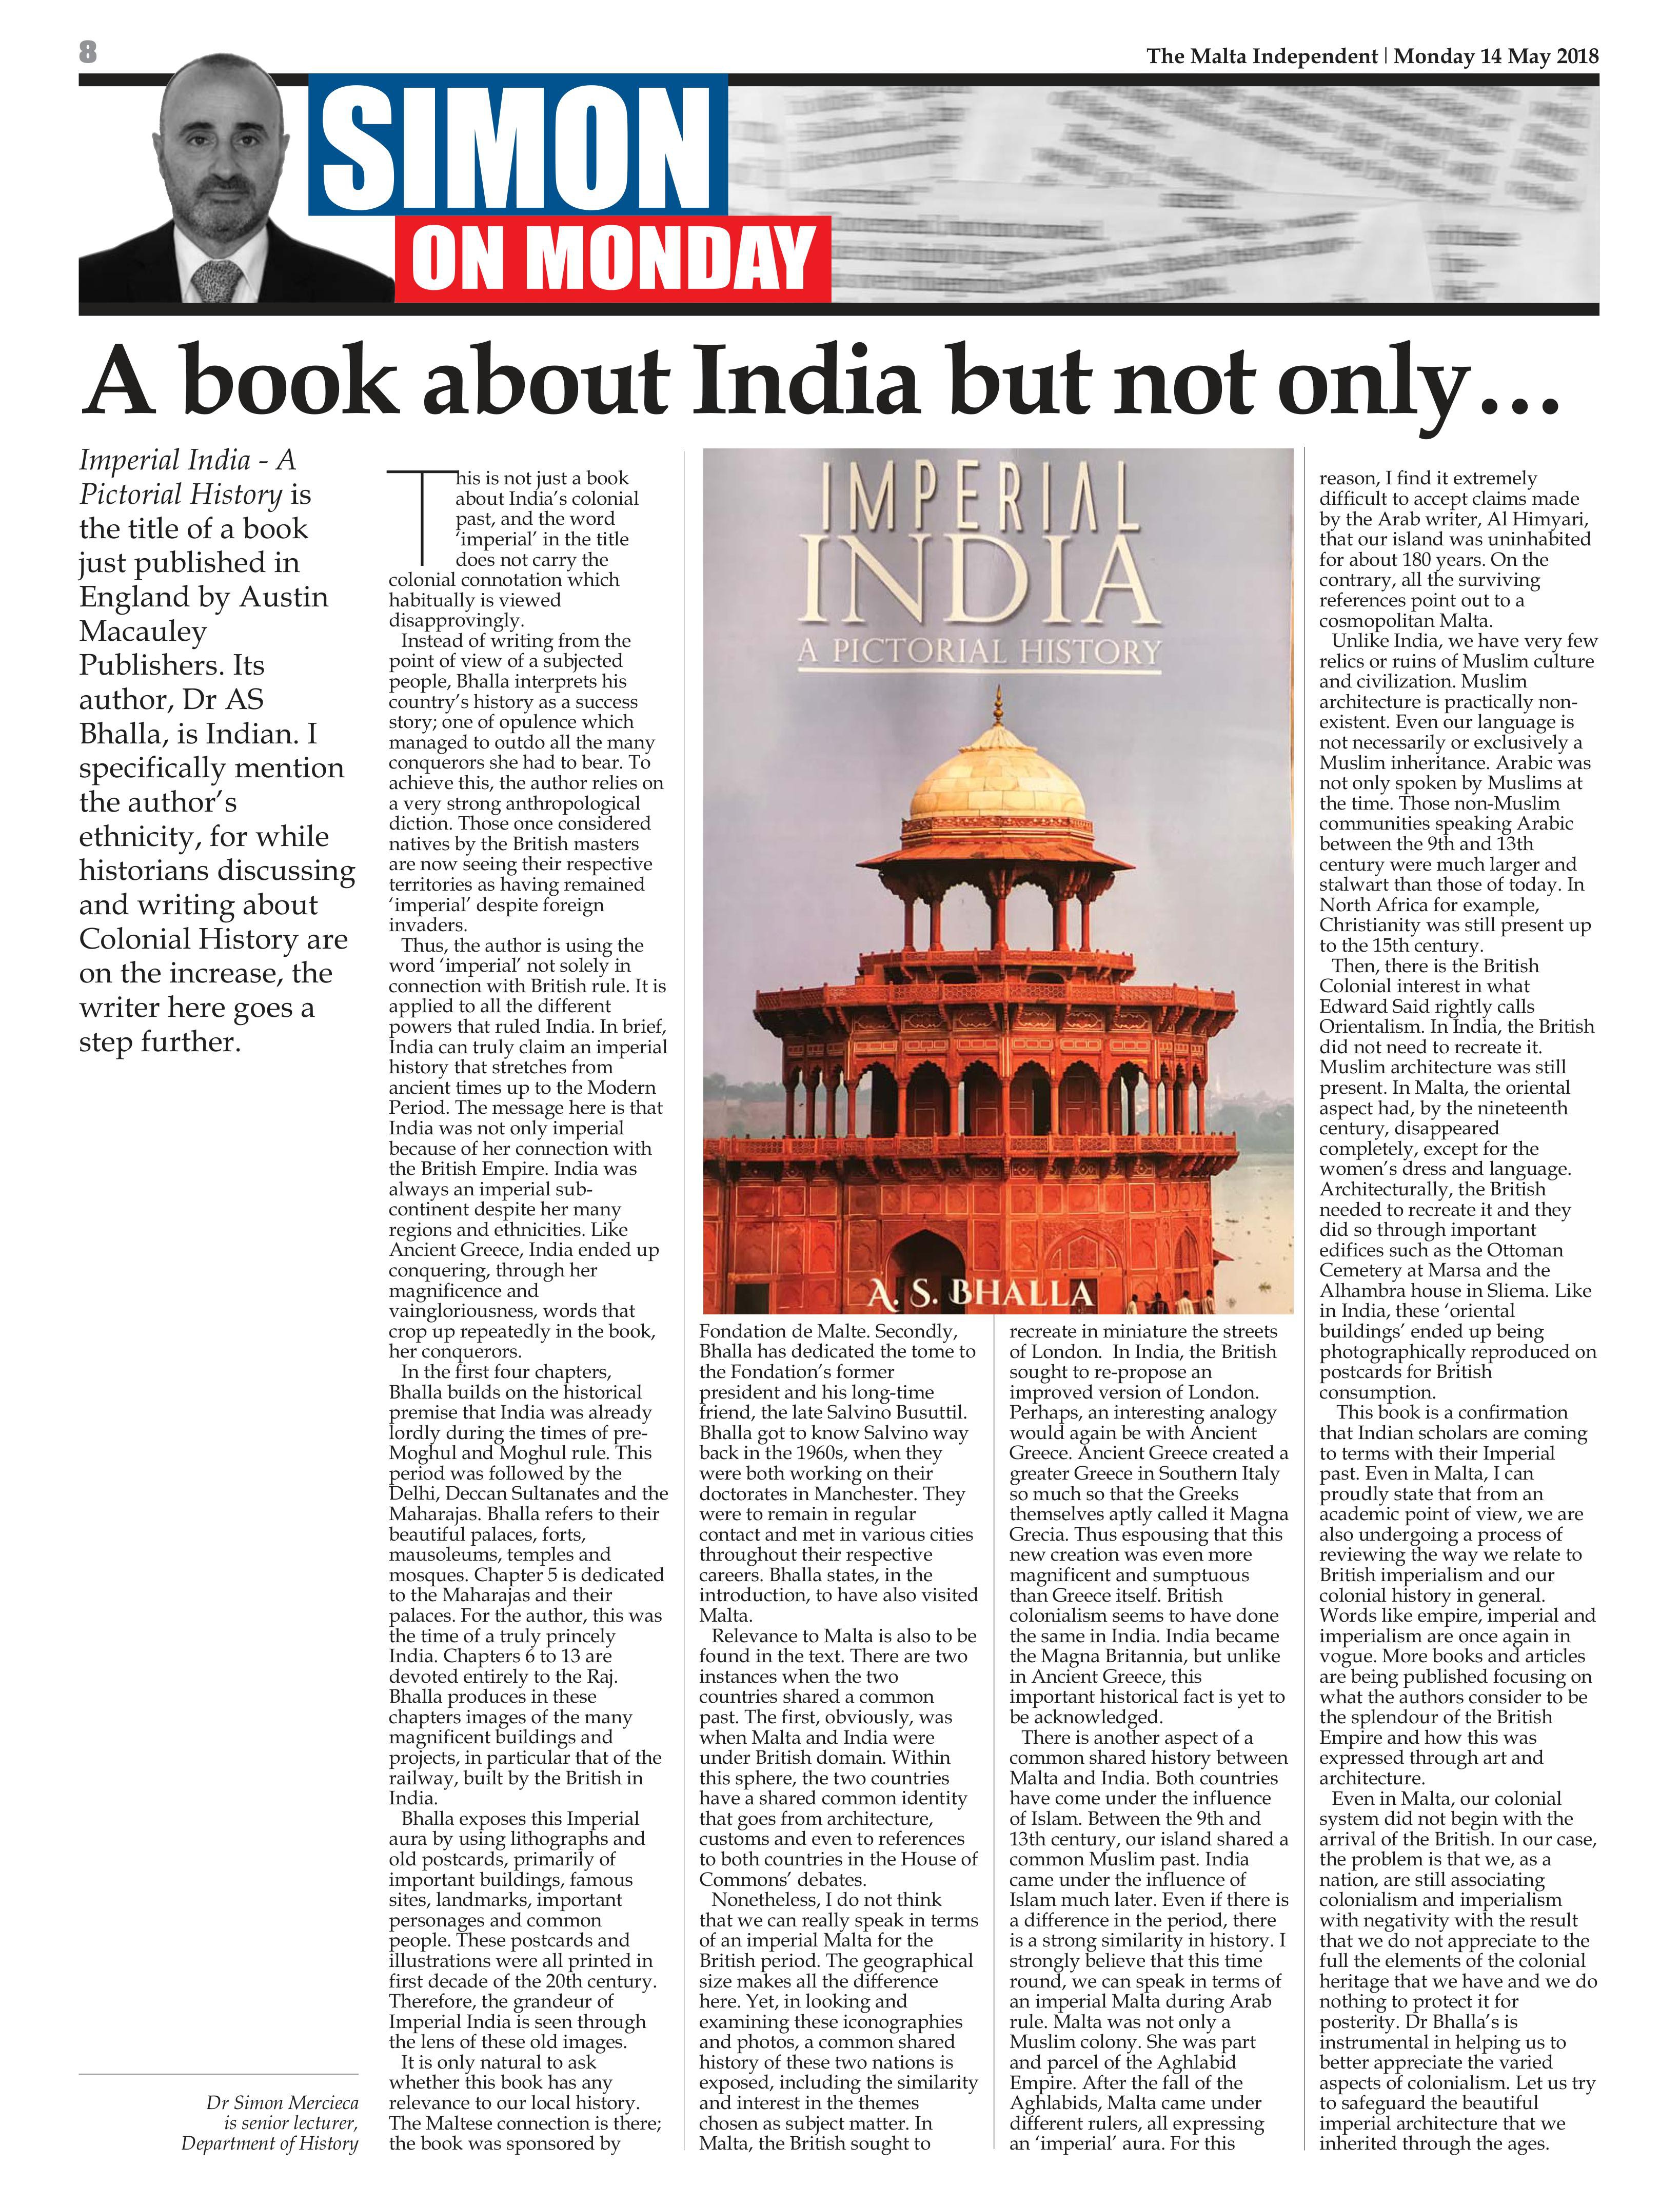 ‘Imperial India: A Pictorial History’ by A.S. Bhalla received a Shining Review in a Newspaper